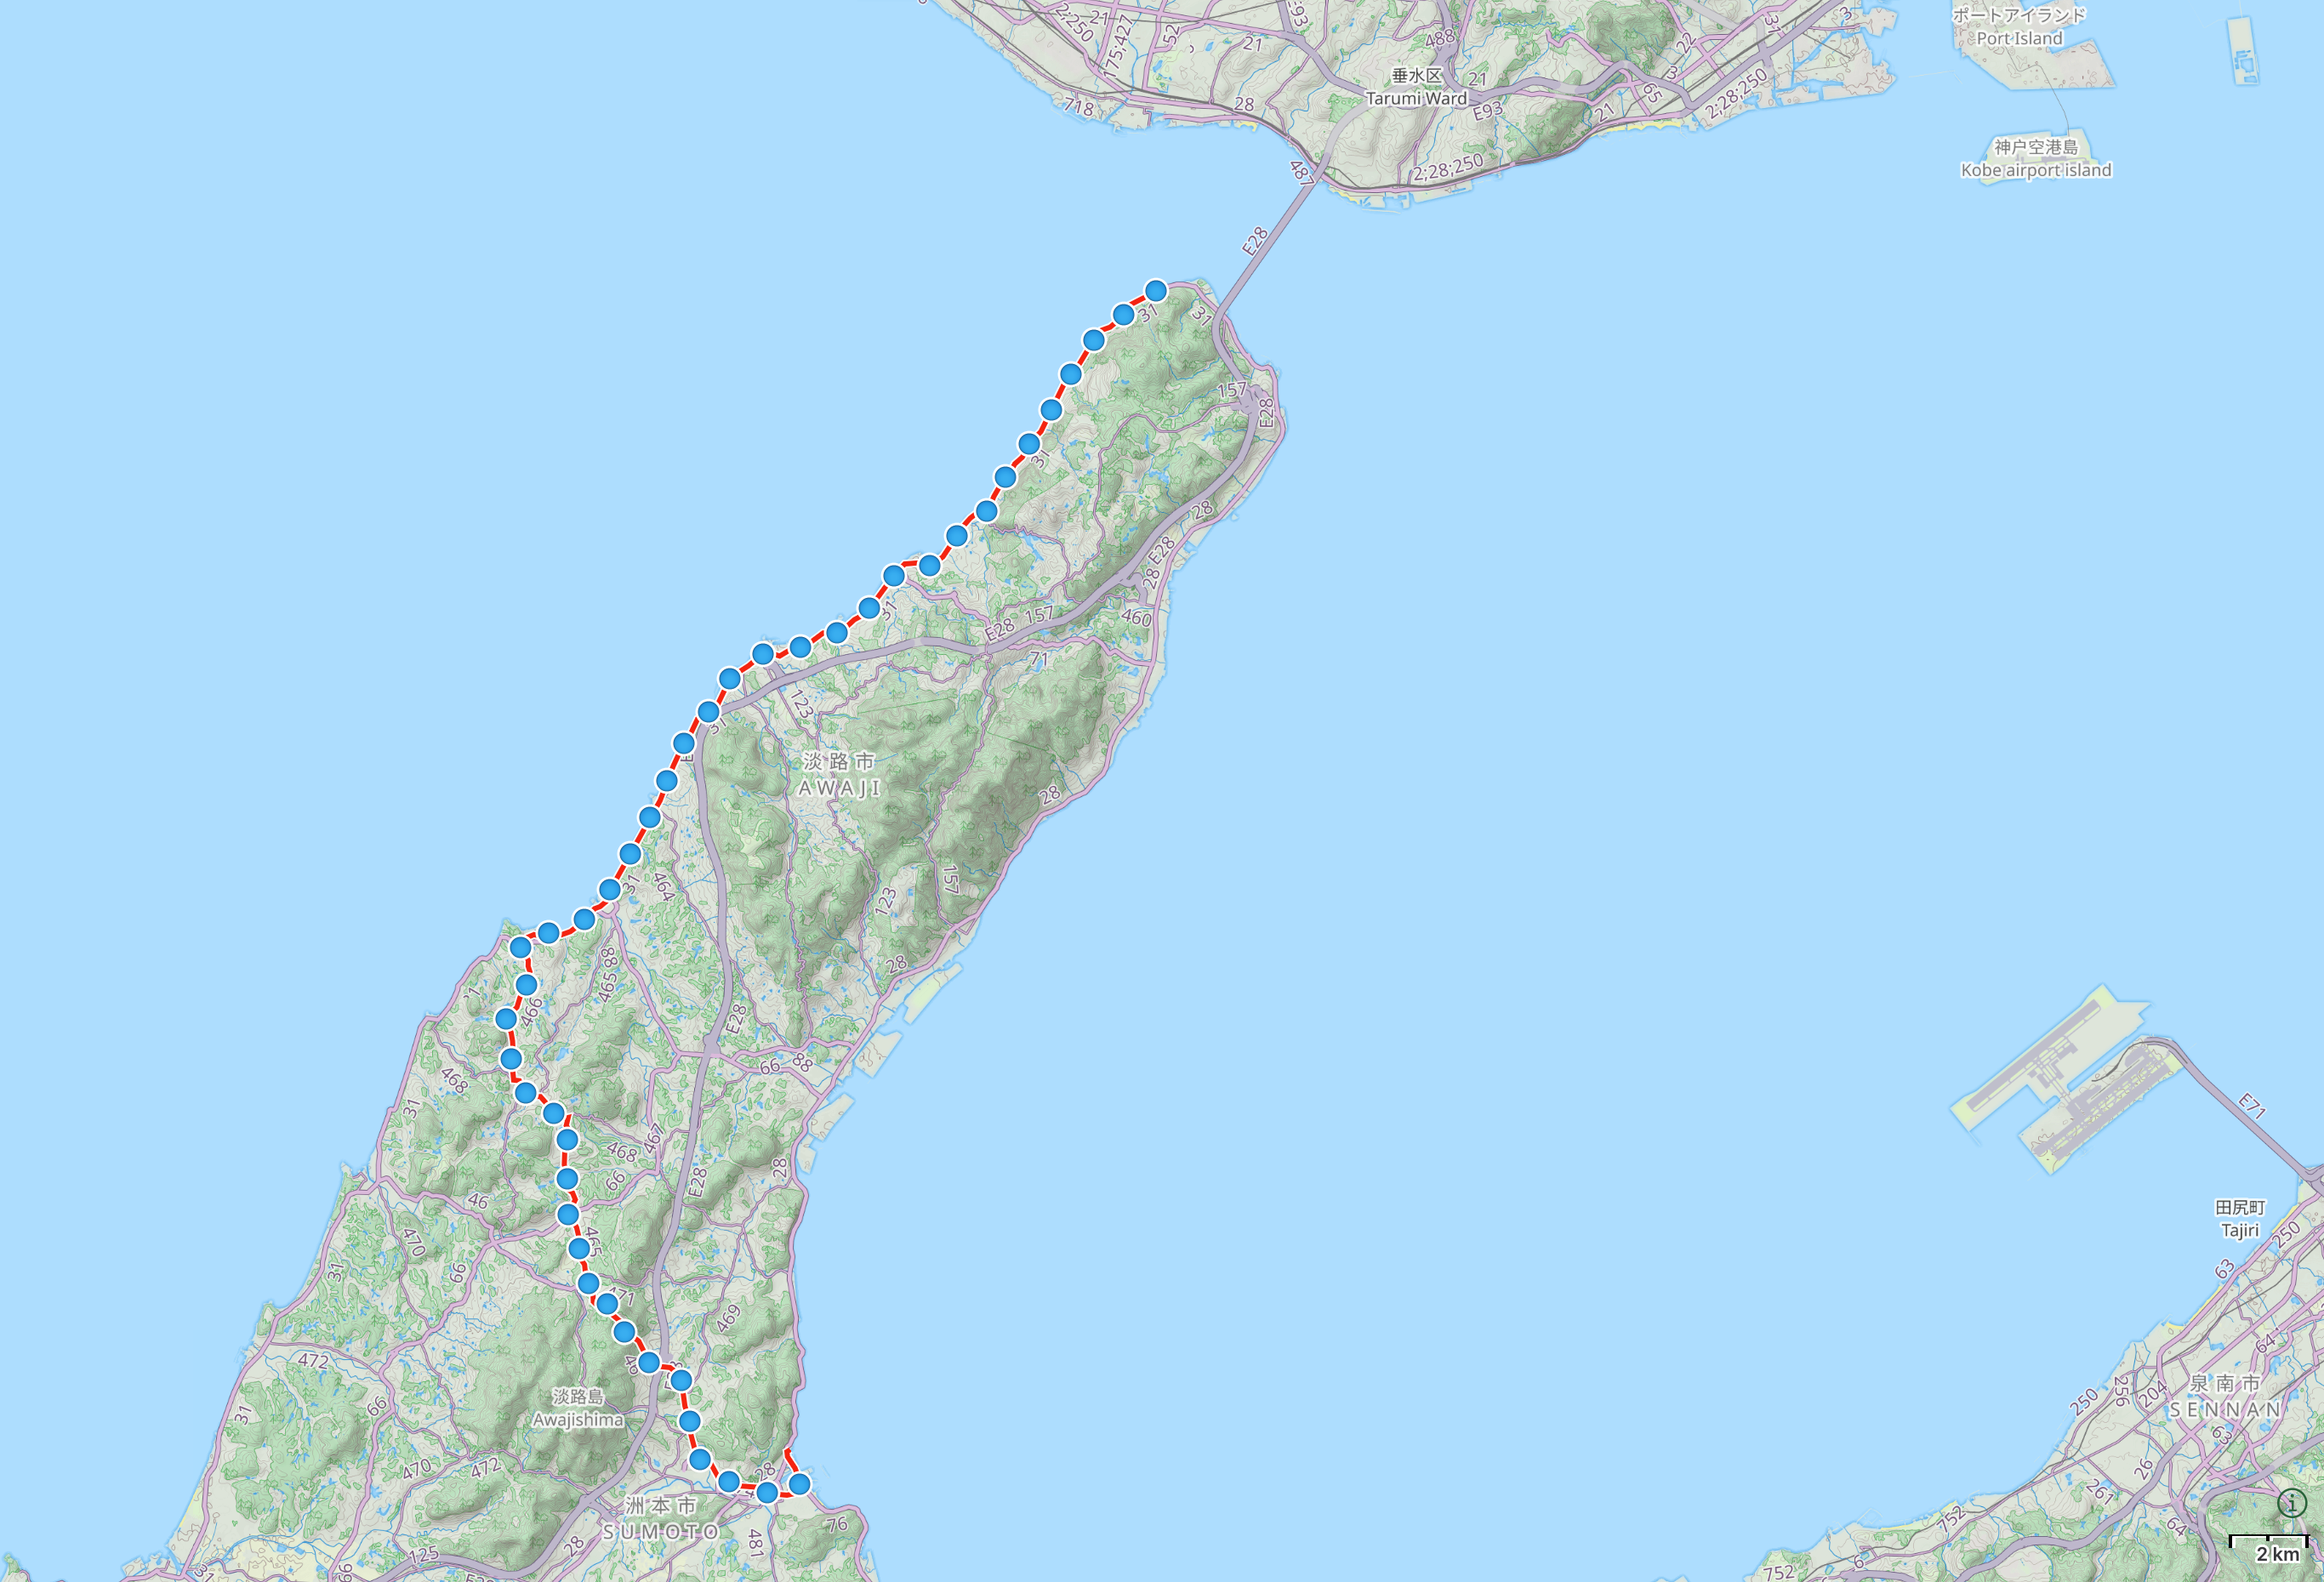 Map of Awaji Island in Hyōgo Prefecture with route between Sumoto and the Esaki Lighthouse highlighted.